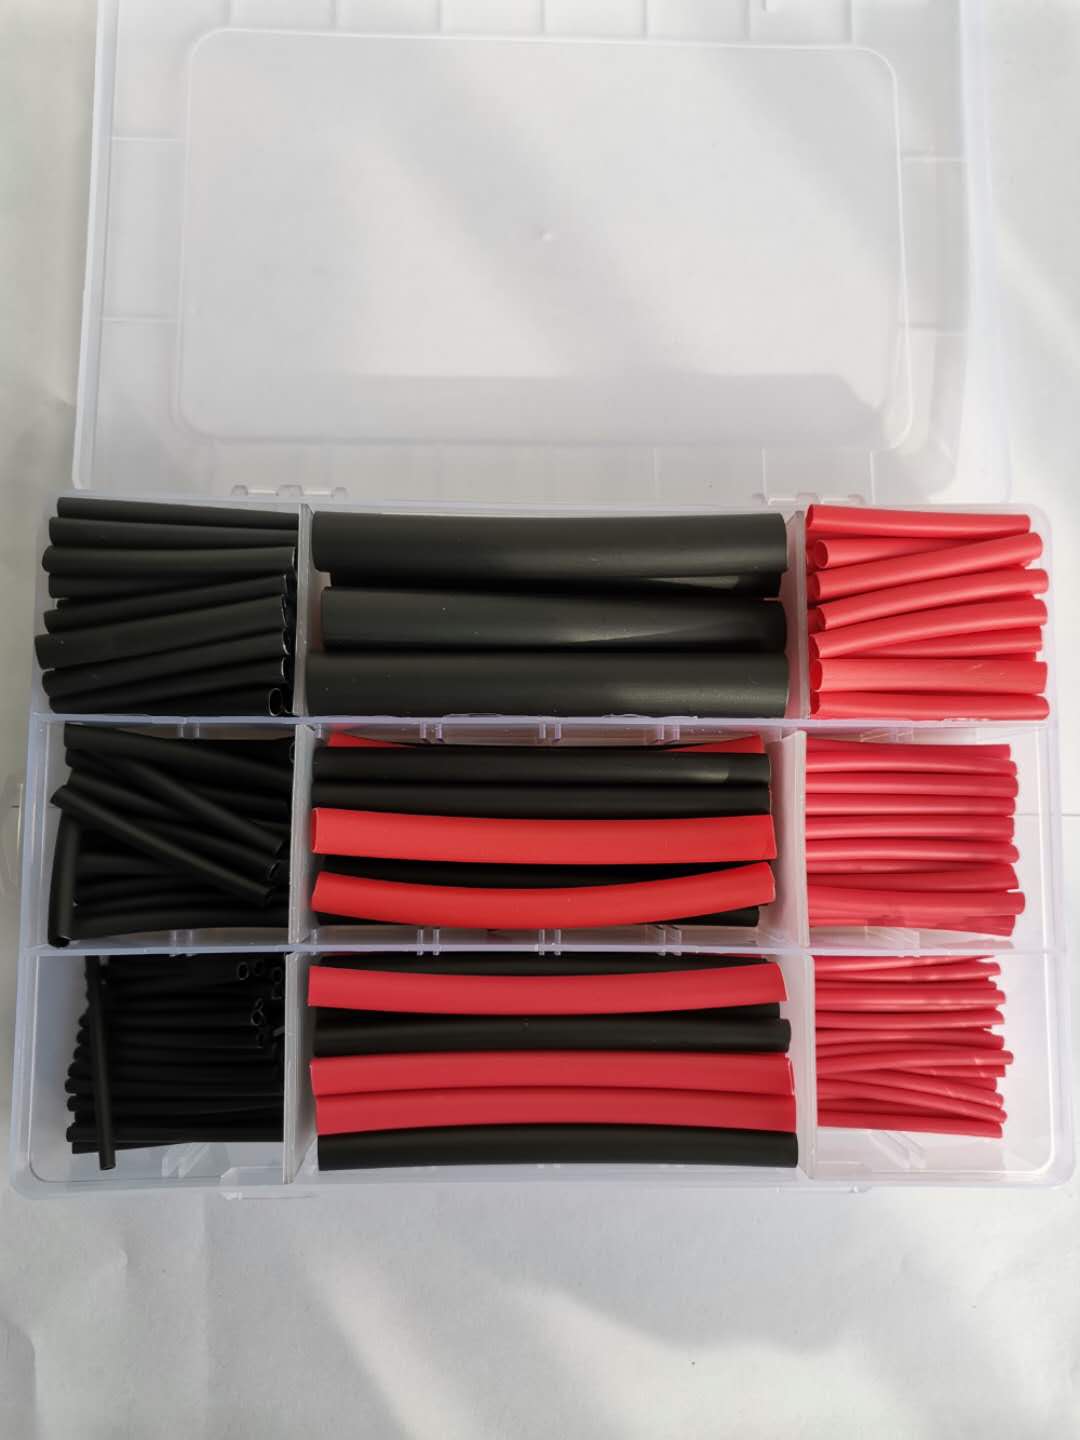 270PCS red and black cases with adhesive heat-shrinkable tubes